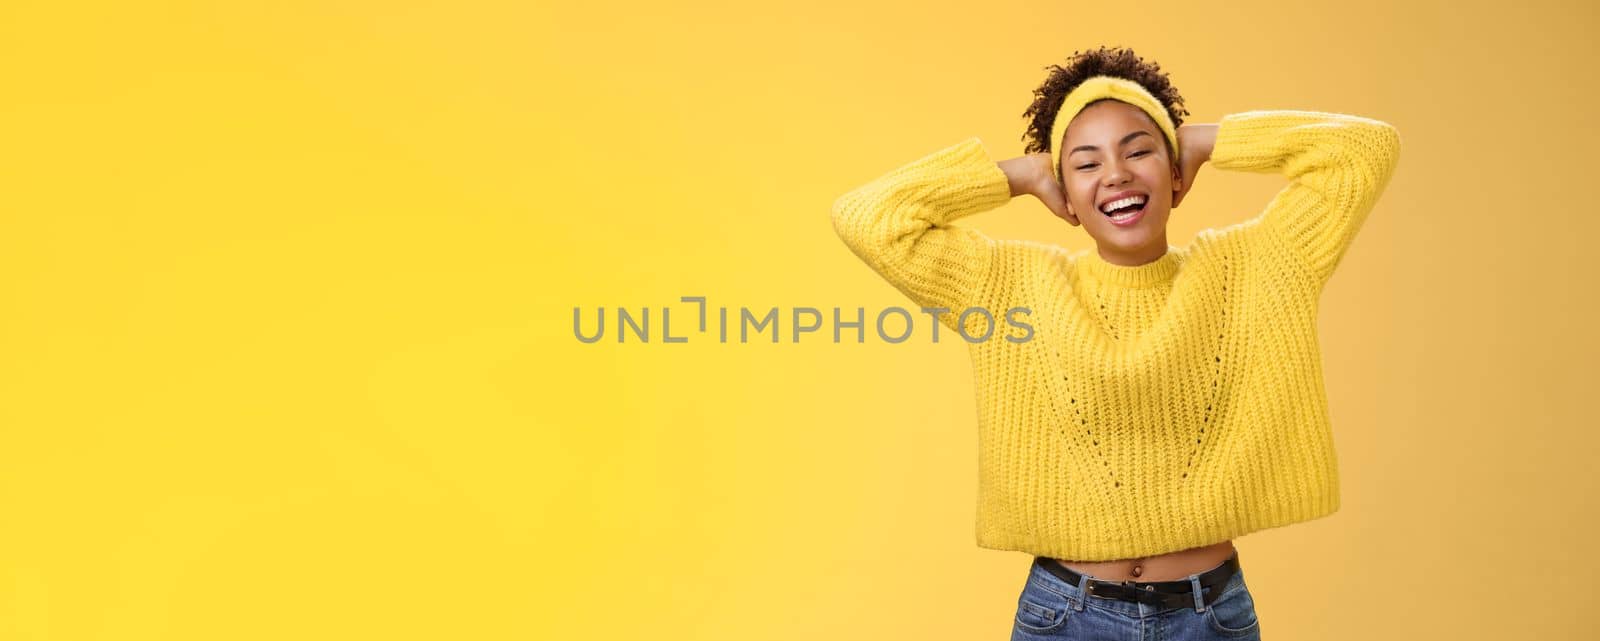 Carefree joyful lucky african-american female student in sweater headband lay back hands behind head relaxed chilling pose having day-off weekend smiling broadly laughing, yellow background.